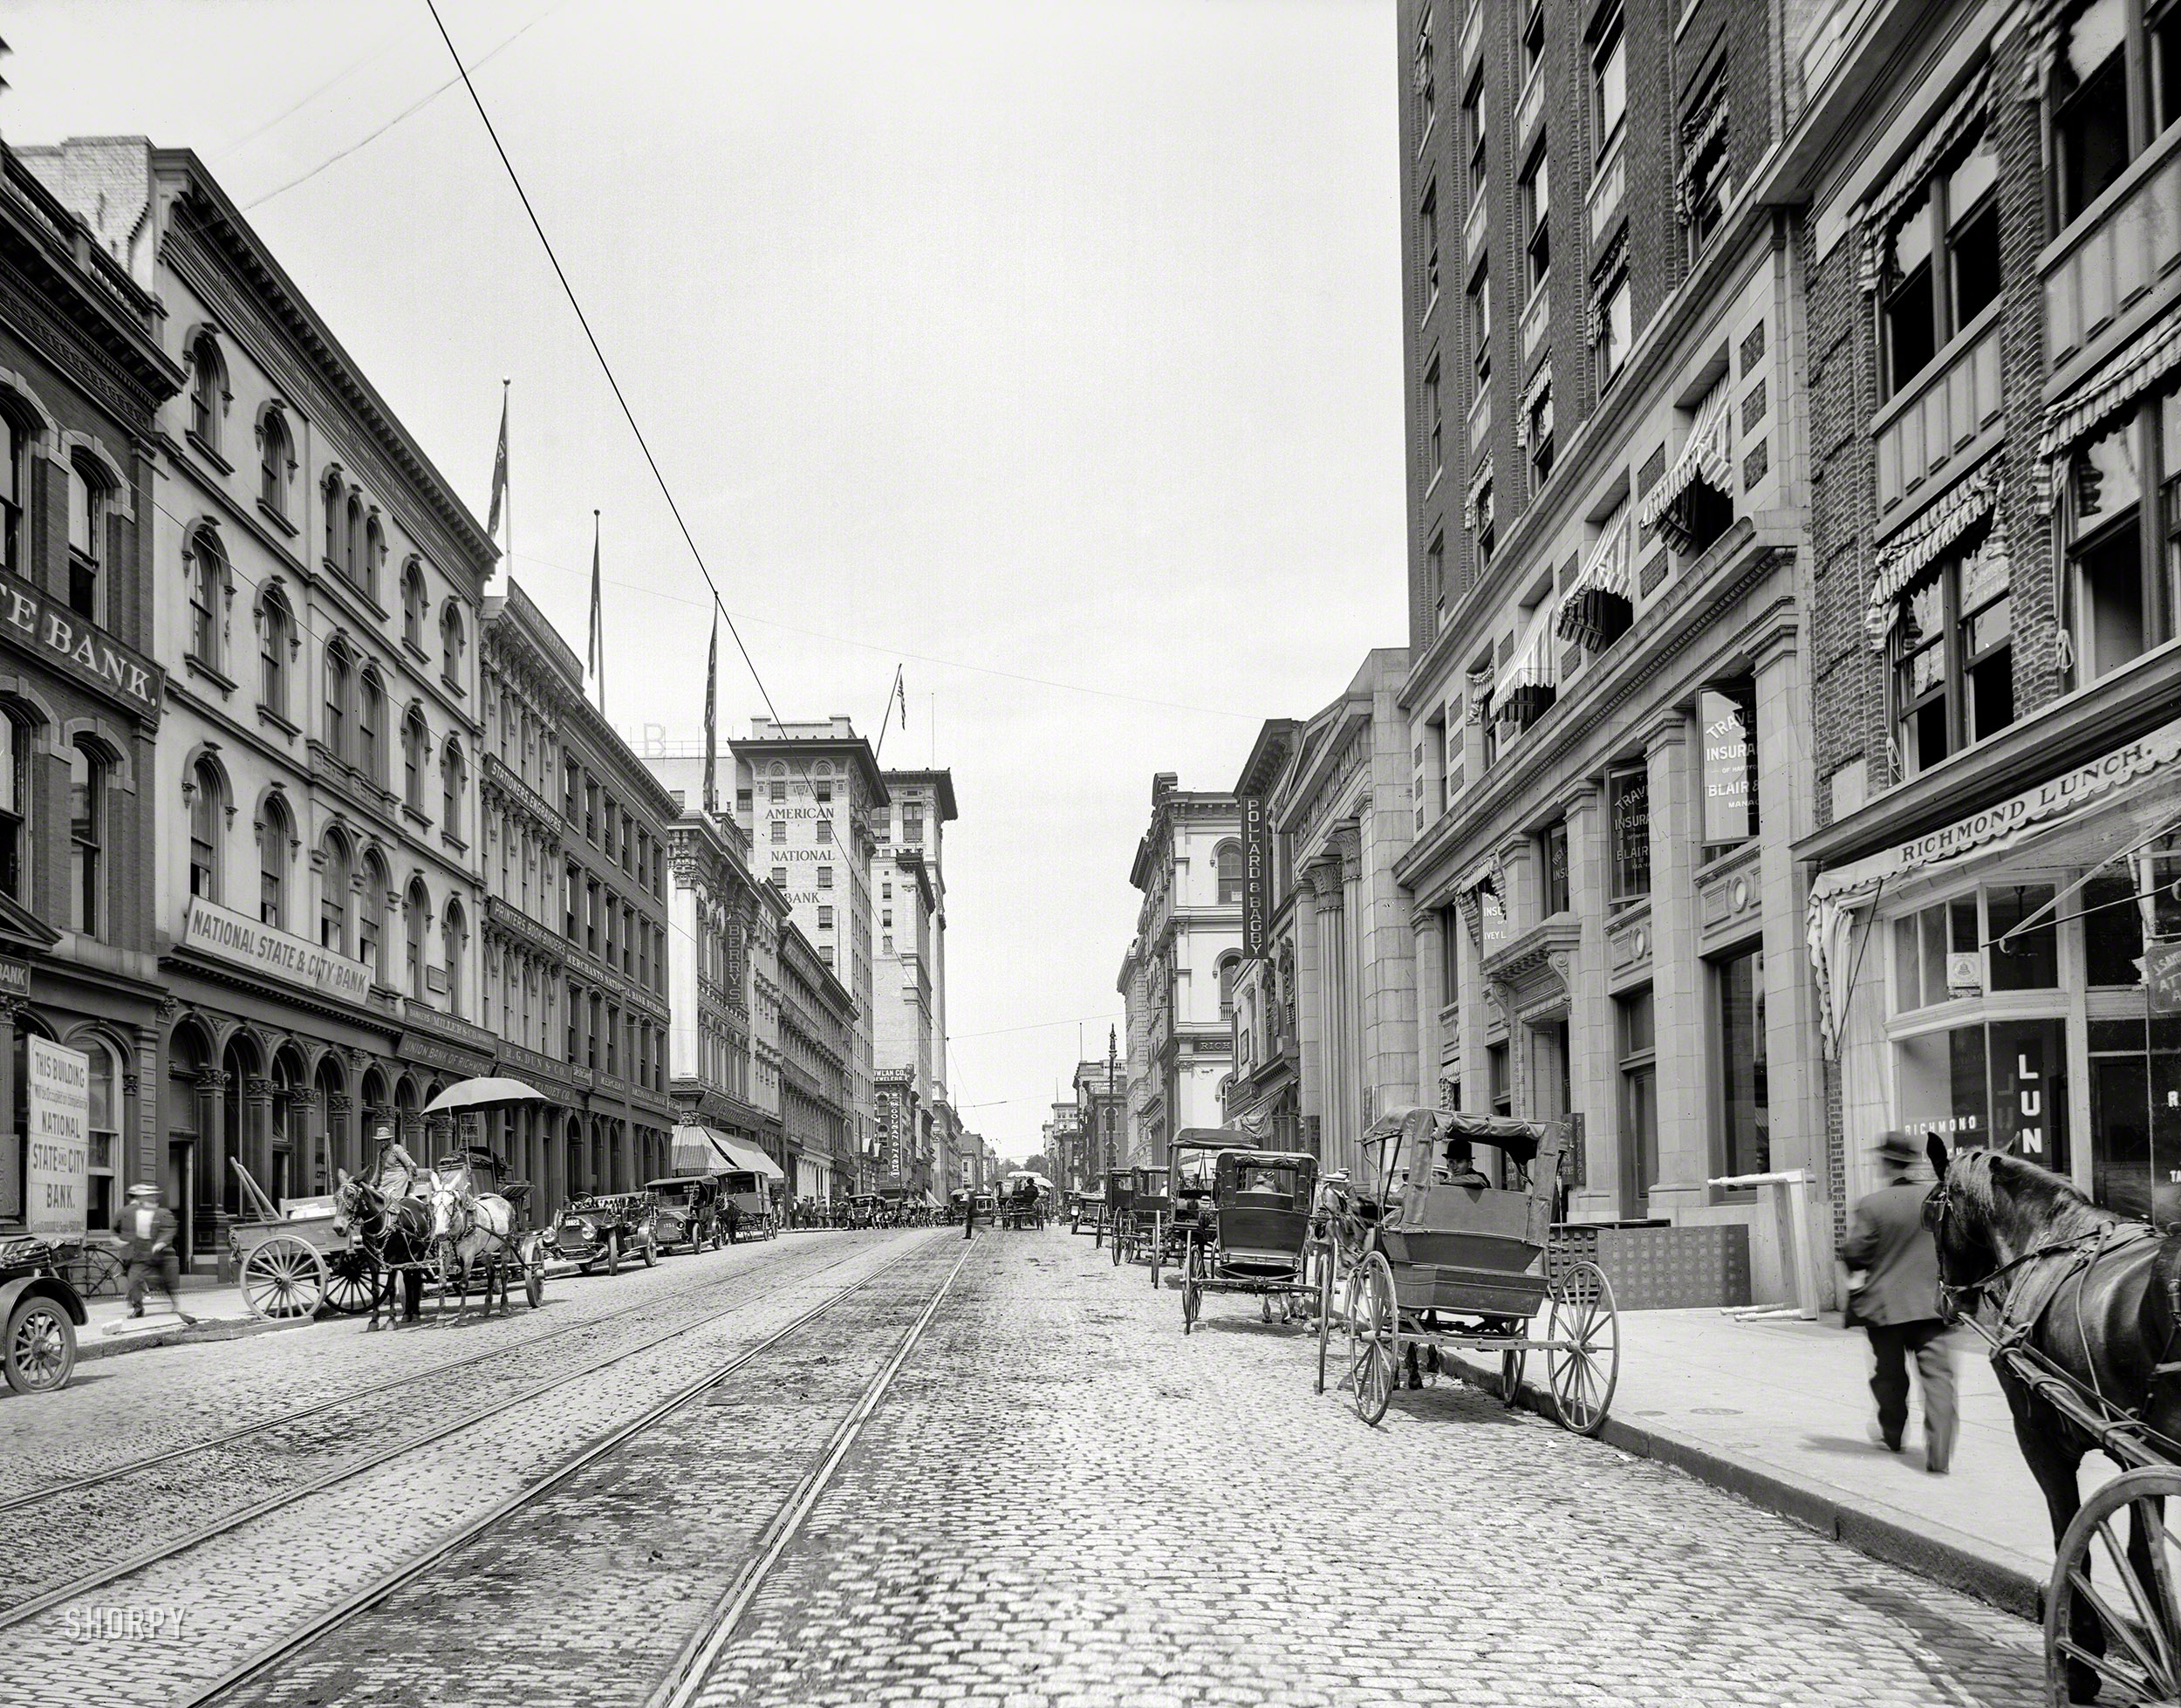 Richmond, Virginia, circa 1912. "Main Street west from Twelfth." A rank of banks. 8x10 inch dry plate glass negative, Detroit Publishing Company. View full size.